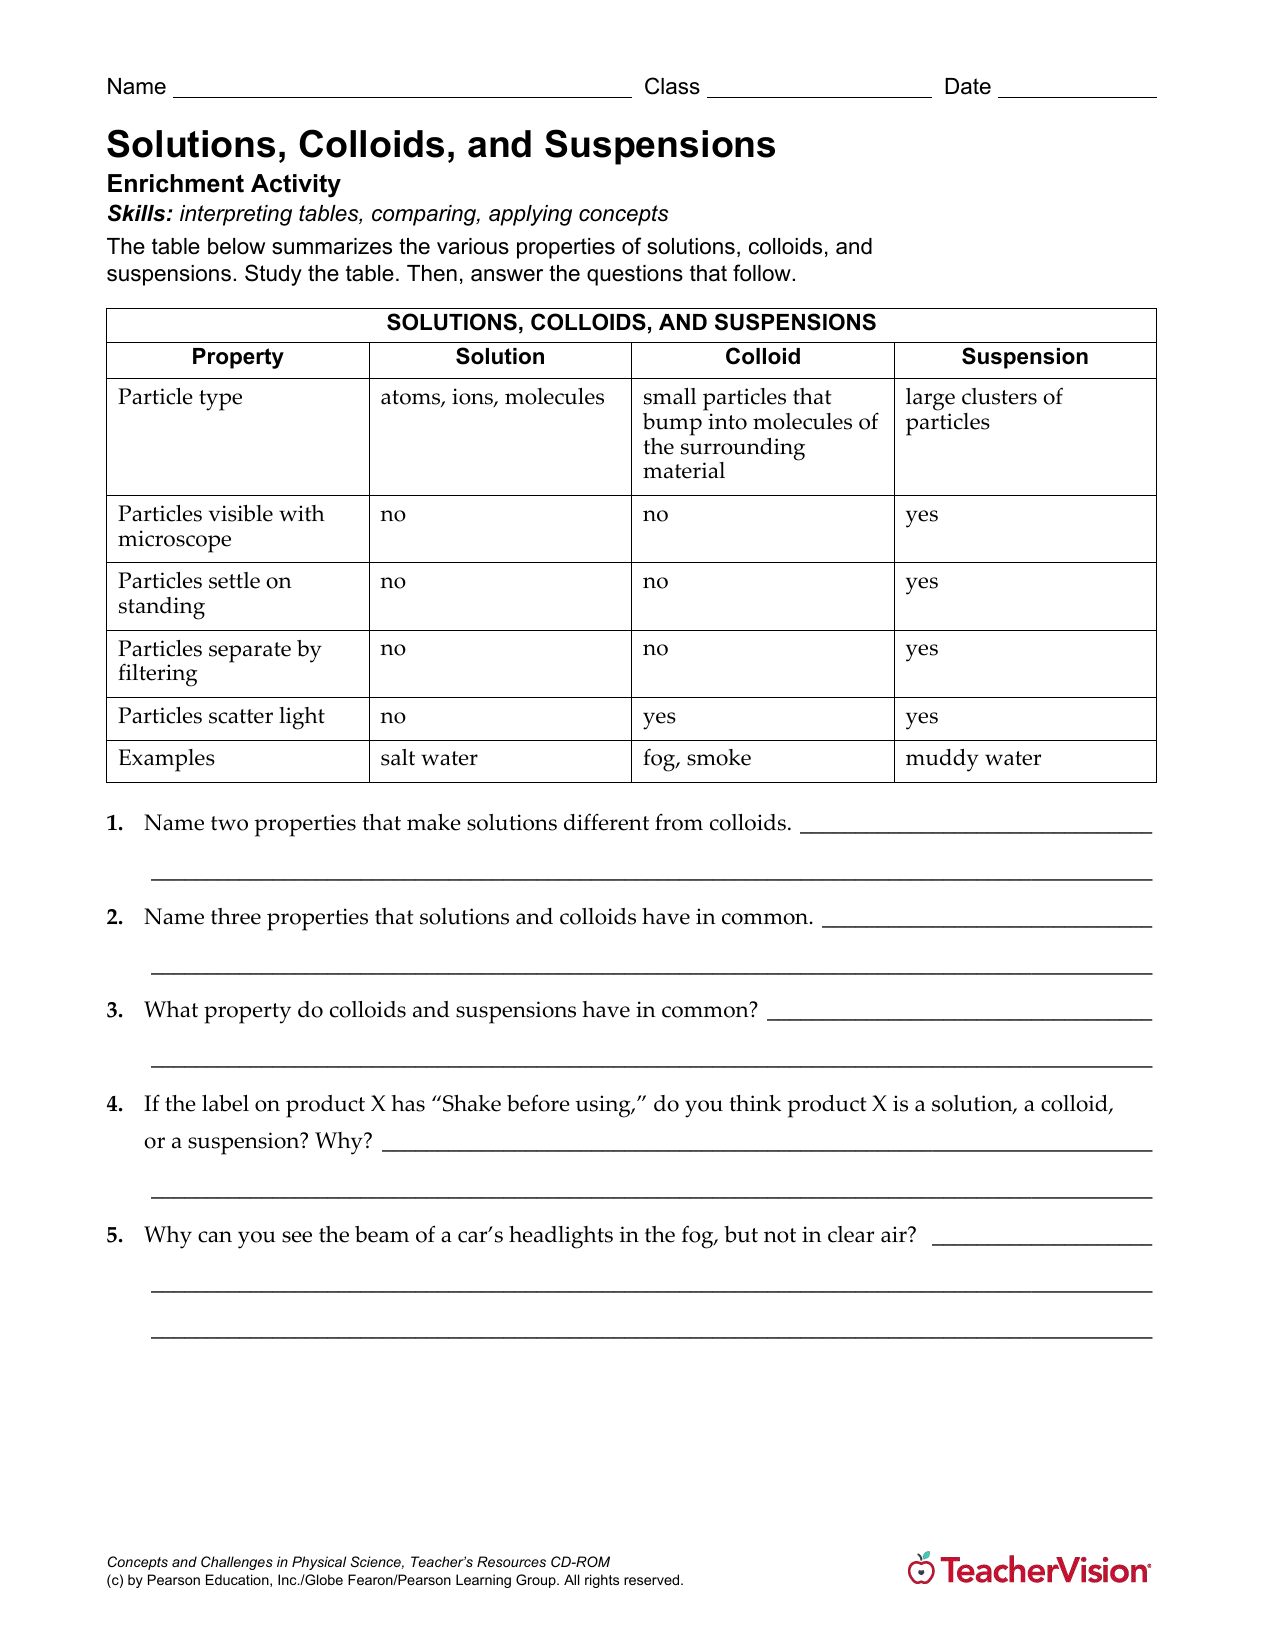 psch11key For Solutions Colloids And Suspensions Worksheet